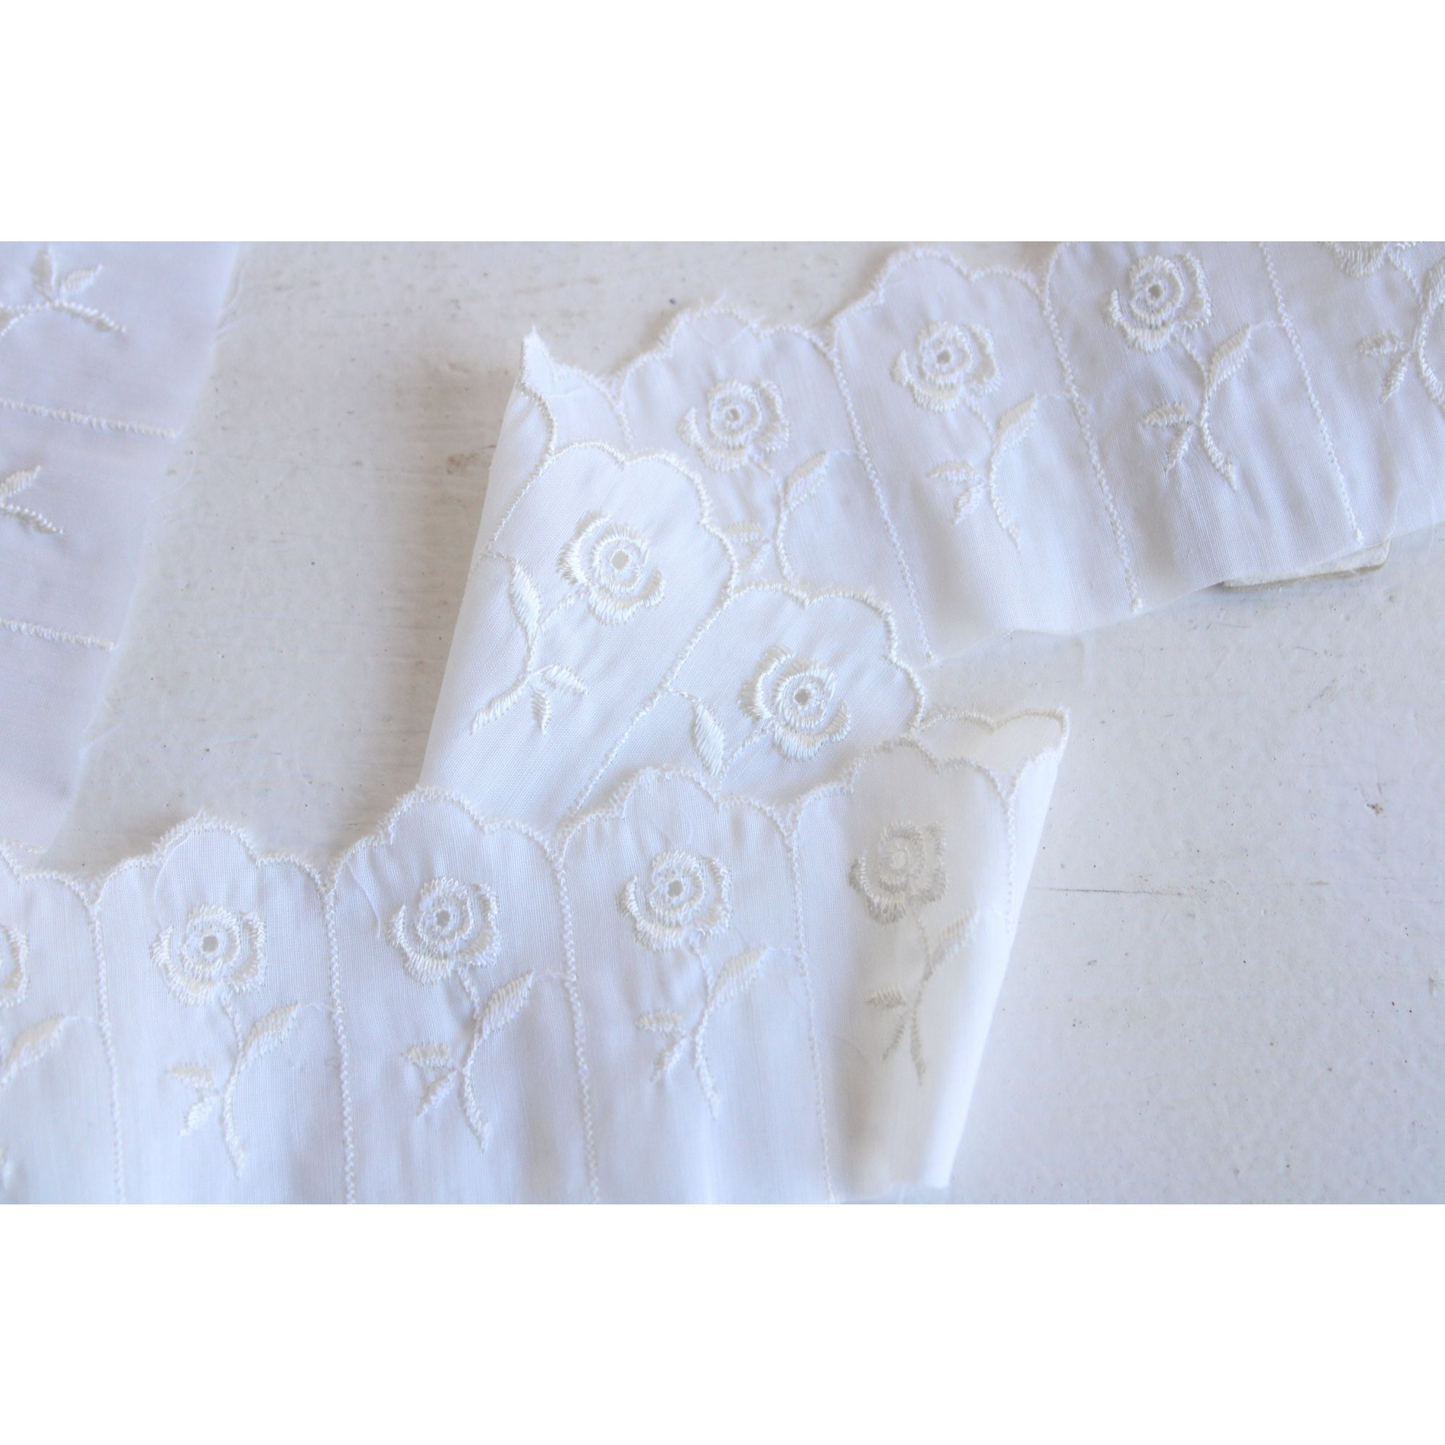 Vintage White Trim Embroidered With Roses 2" Wide / 2 yards